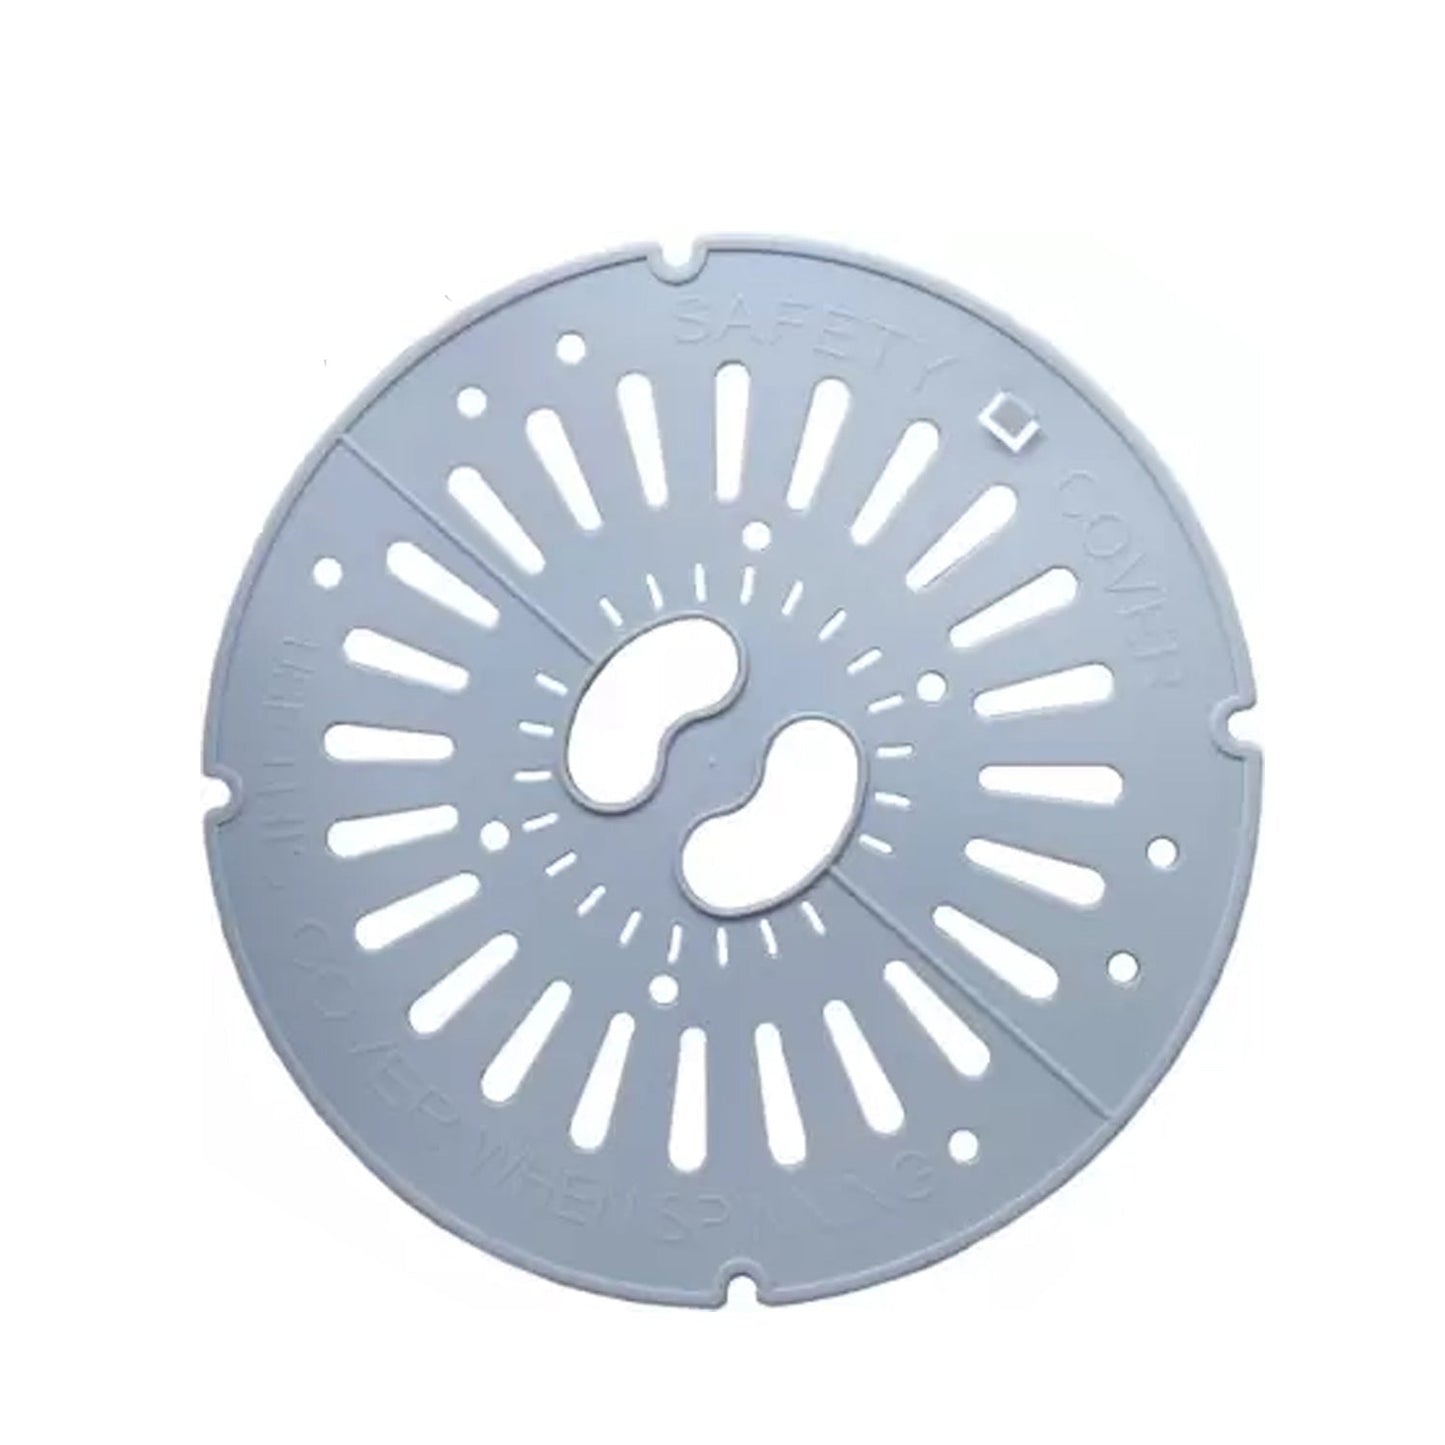 4717 Spin Cap Safety Cover primerce